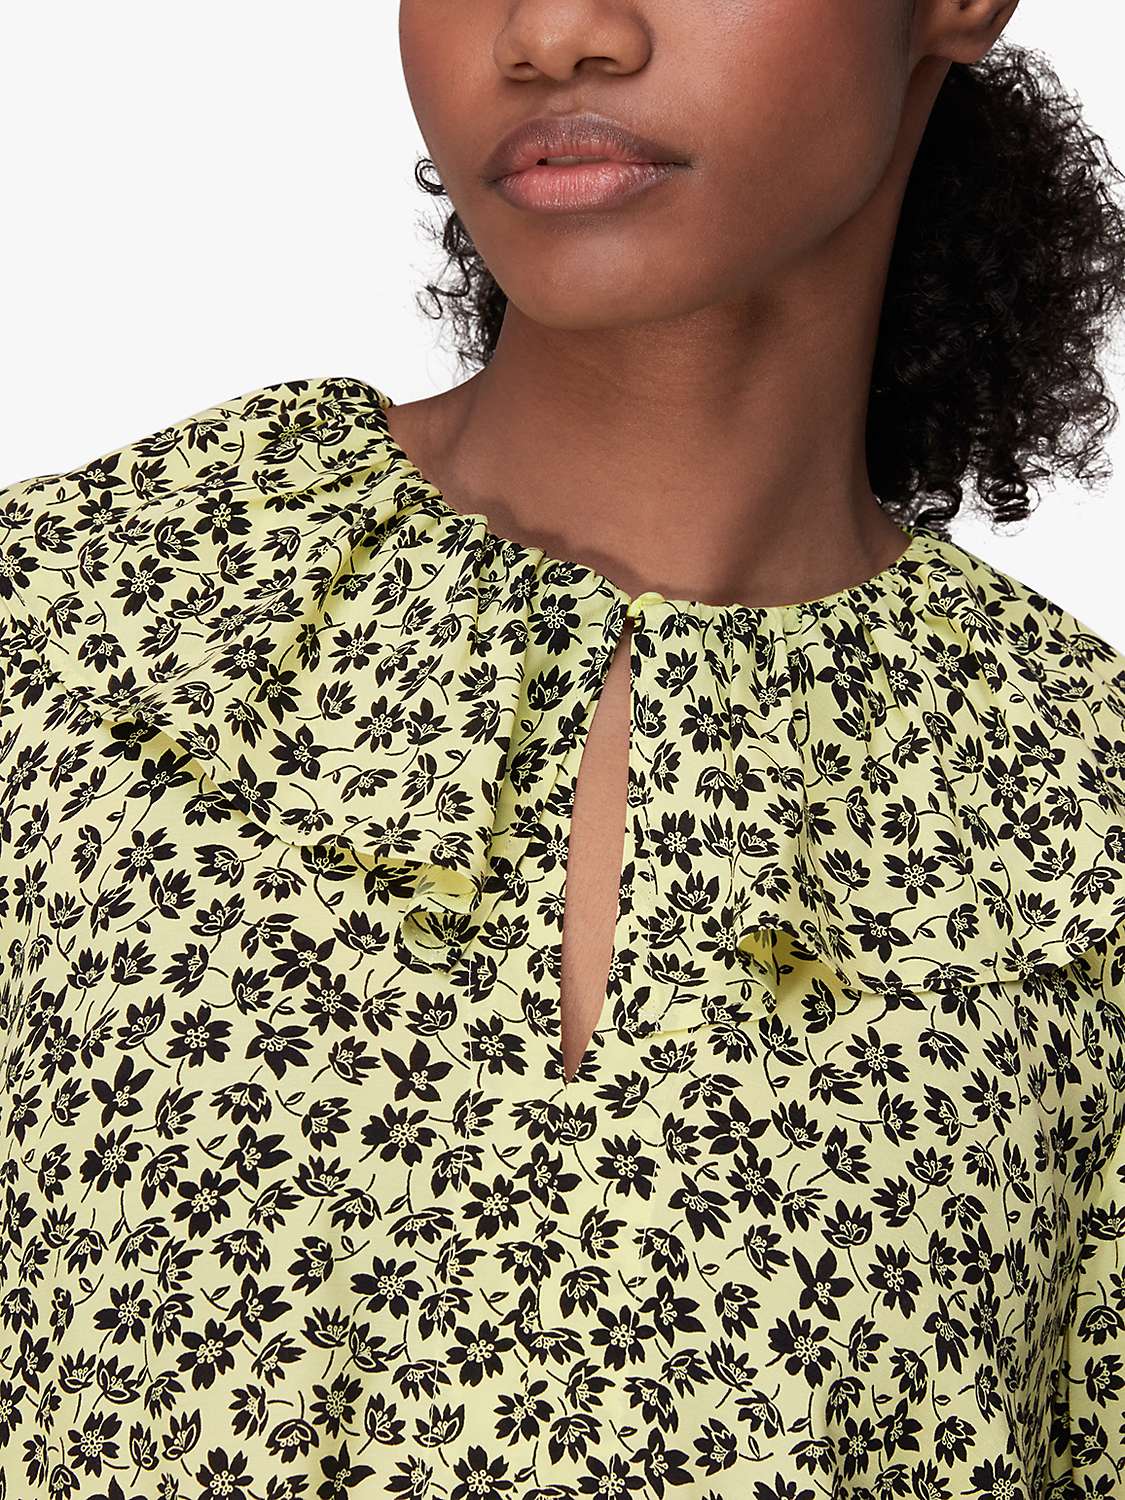 Buy Whistles Buttercup Floral Print Dress, Yellow/Multi Online at johnlewis.com